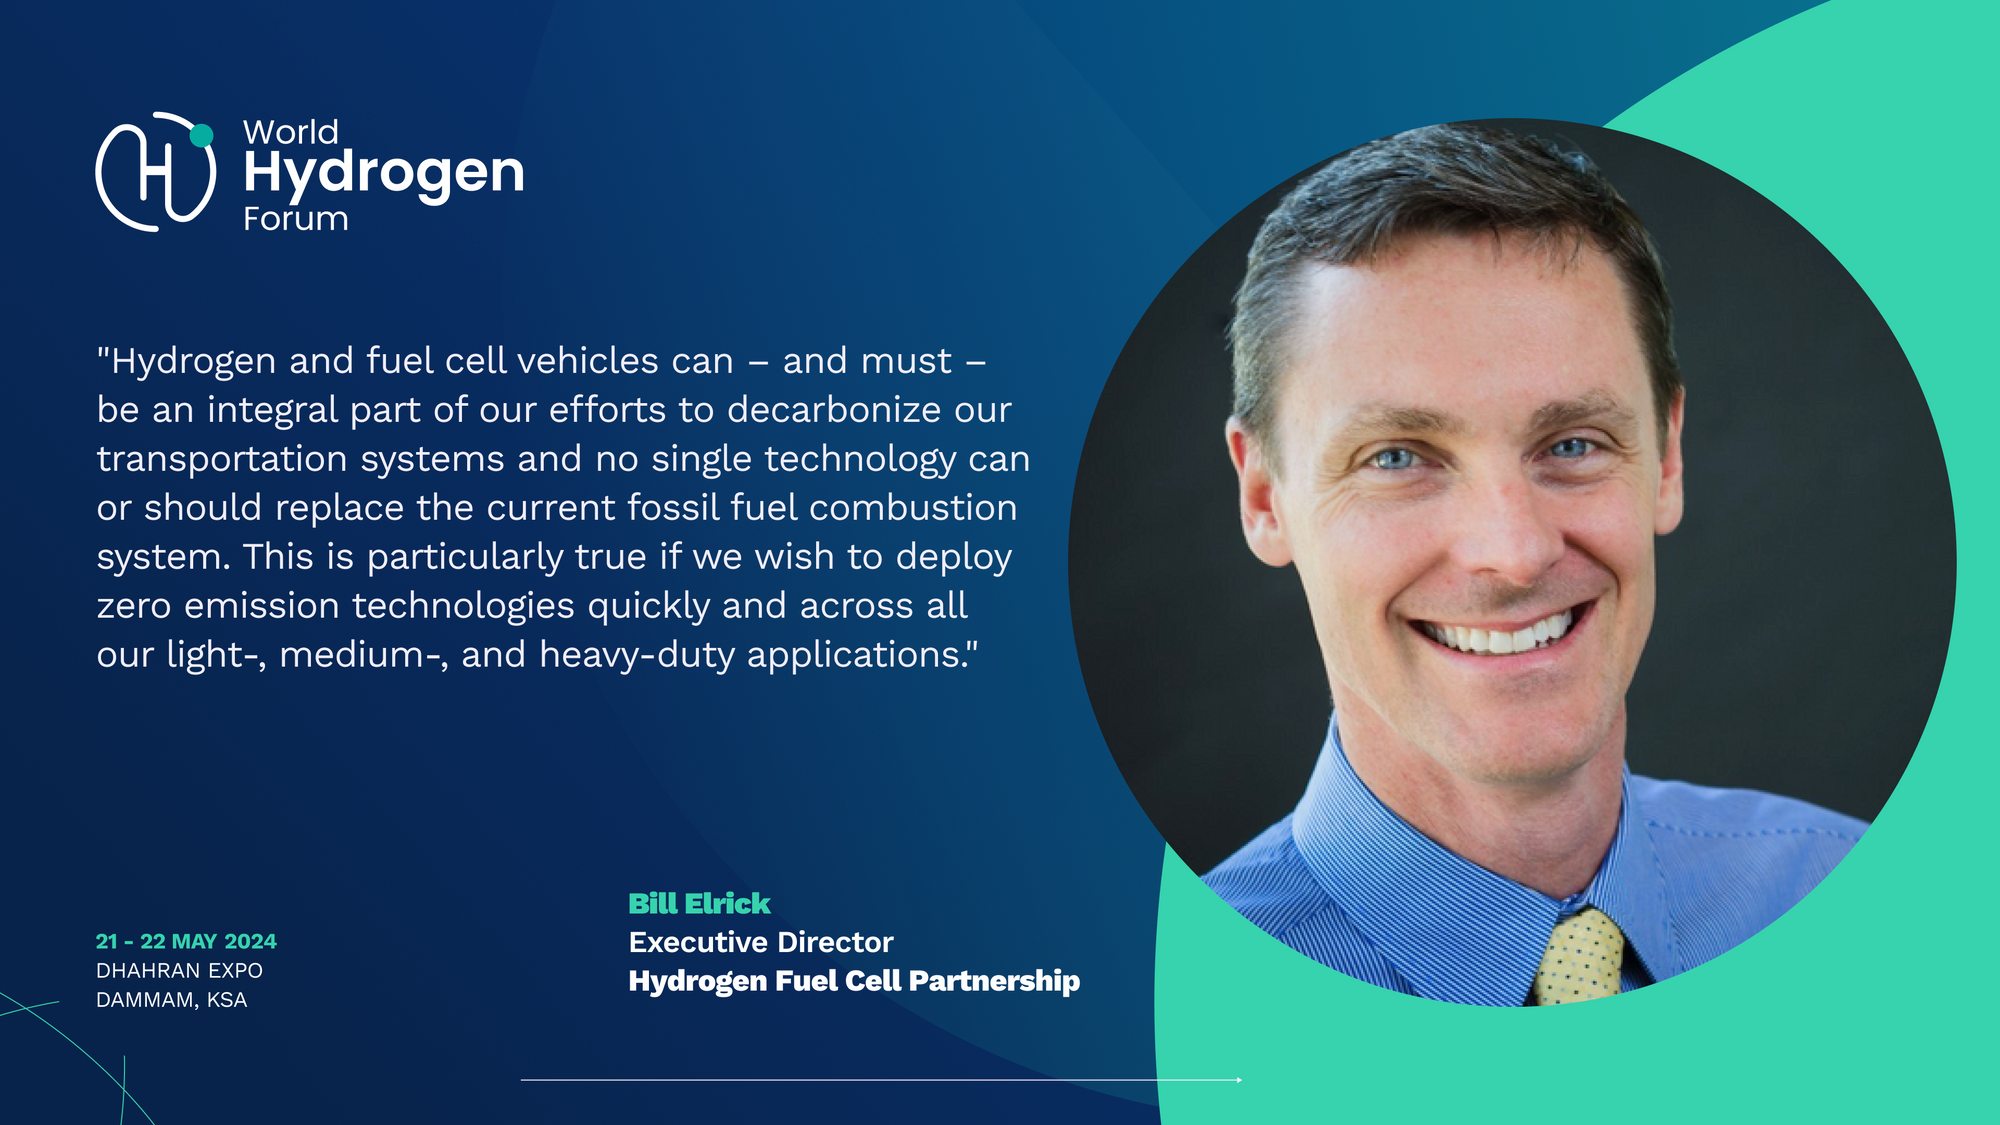 Insightful Q&A Session With Bill Elrick, Executive Director of the Hydrogen Fuel Cell Partnership